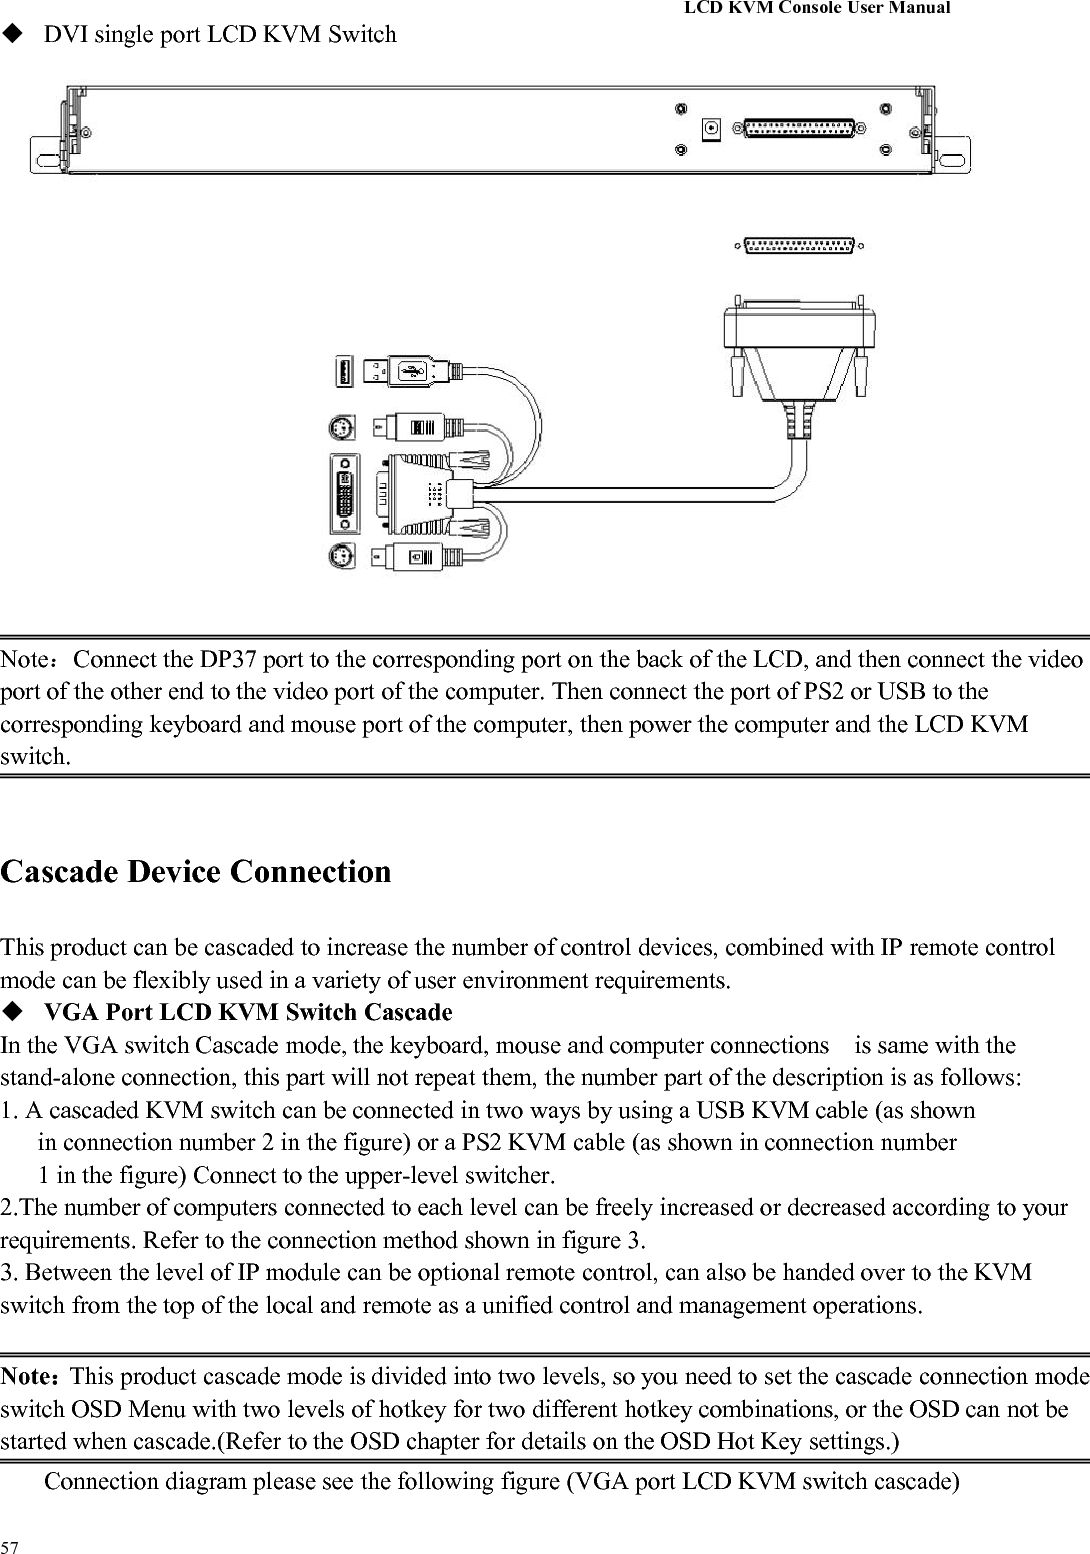 LCD KVM Console User Manual57DVI single port LCD KVM SwitchNote：Connect the DP37 port to the corresponding port on the back of the LCD, and then connect the videoport of the other end to the video port of the computer. Then connect the port of PS2 or USB to thecorresponding keyboard and mouse port of the computer, then power the computer and the LCD KVMswitch.Cascade Device ConnectionThis product can be cascaded to increase the number of control devices, combined with IP remote controlmode can be flexibly used in a variety of user environment requirements.VGA Port LCD KVM Switch CascadeIn the VGA switch Cascade mode, the keyboard, mouse and computer connections is same with thestand-alone connection, this part will not repeat them, the number part of the description is as follows:1. A cascaded KVM switch can be connected in two ways by using a USB KVM cable (as shownin connection number 2 in the figure) or a PS2 KVM cable (as shown in connection number1 in the figure) Connect to the upper-level switcher.2.The number of computers connected to each level can be freely increased or decreased according to yourrequirements. Refer to the connection method shown in figure 3.3. Between the level of IP module can be optional remote control, can also be handed over to the KVMswitch from the top of the local and remote as a unified control and management operations.Note：This product cascade mode is divided into two levels, so you need to set the cascade connection modeswitch OSD Menu with two levels of hotkey for two different hotkey combinations, or the OSD can not bestarted when cascade.(Refer to the OSD chapter for details on the OSD Hot Key settings.)Connection diagram please see the following figure (VGA port LCD KVM switch cascade)